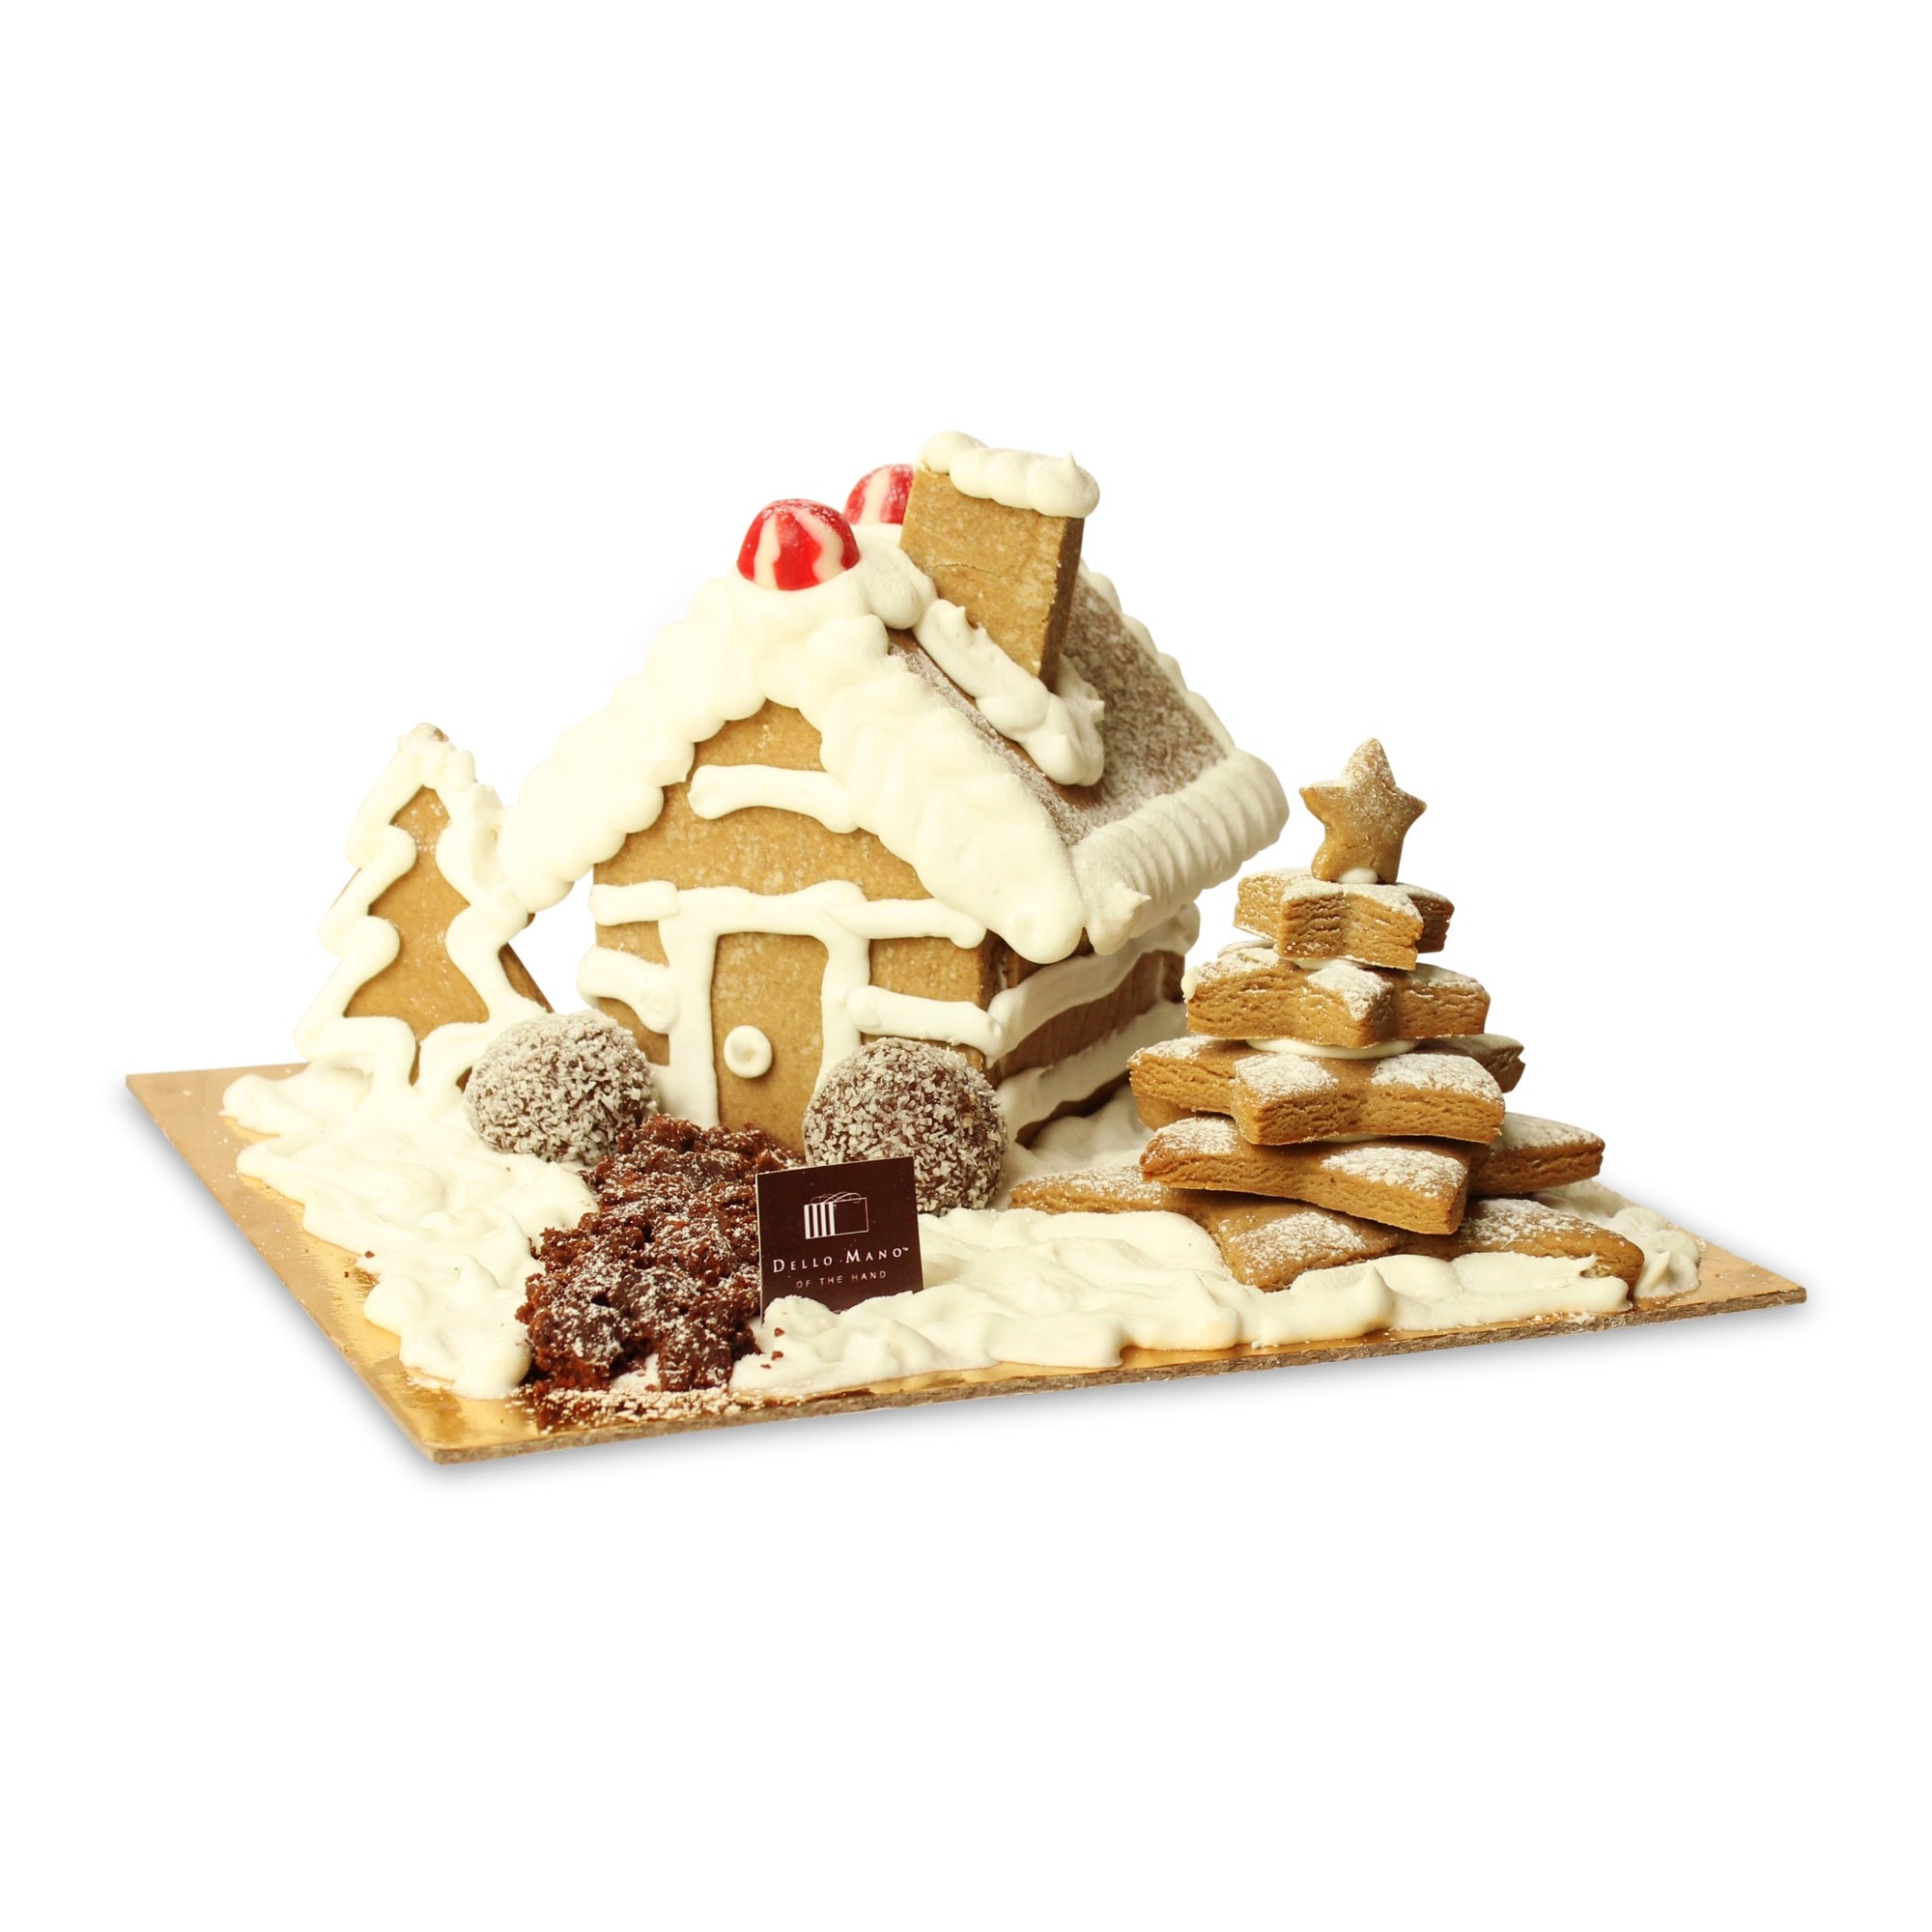 Ginger Bread House by Dello Mano - front door view